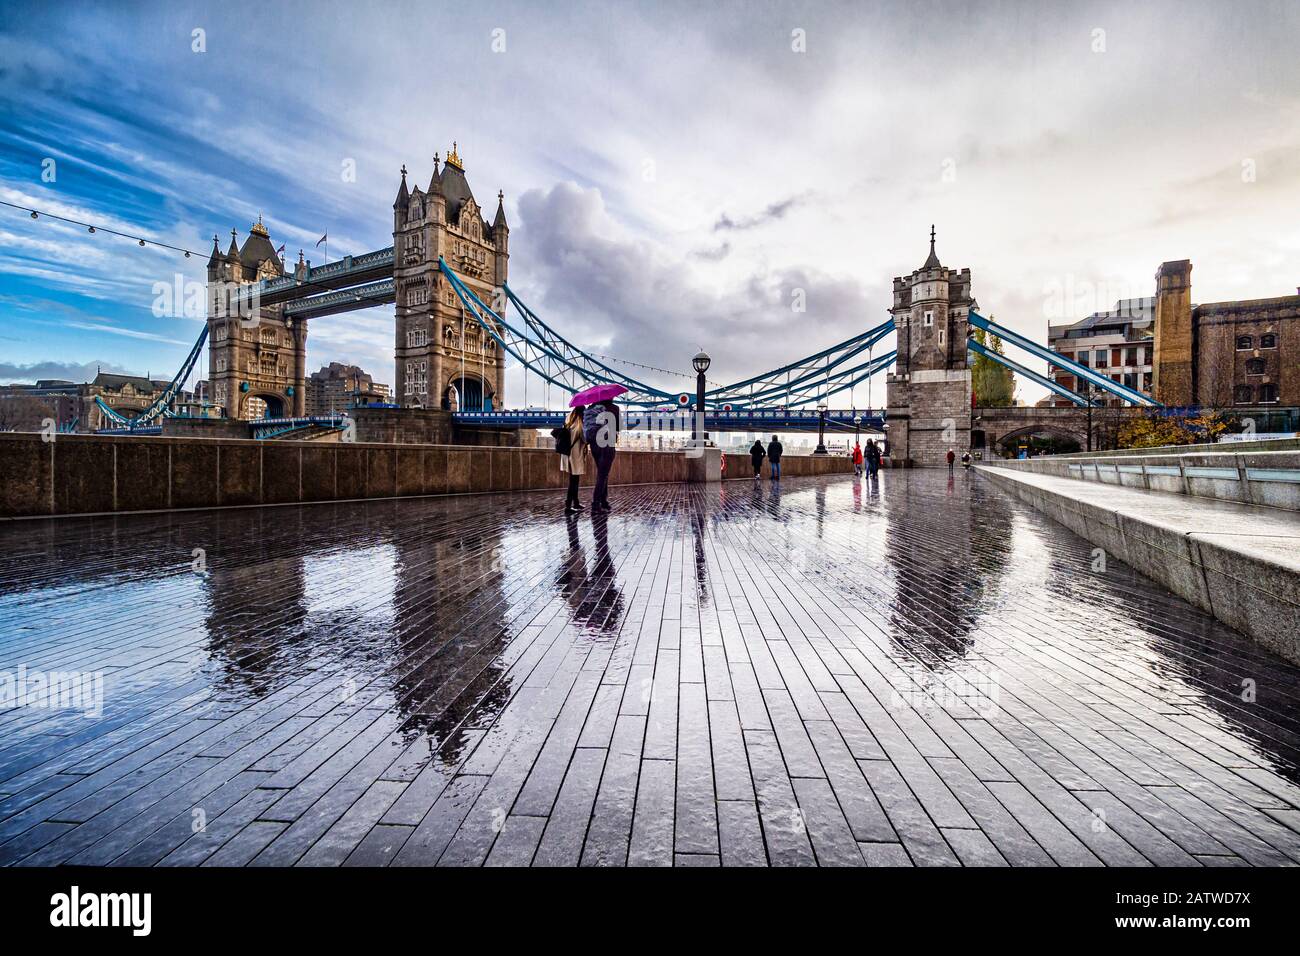 The tower Bridge of London in a rainy morning Stock Photo